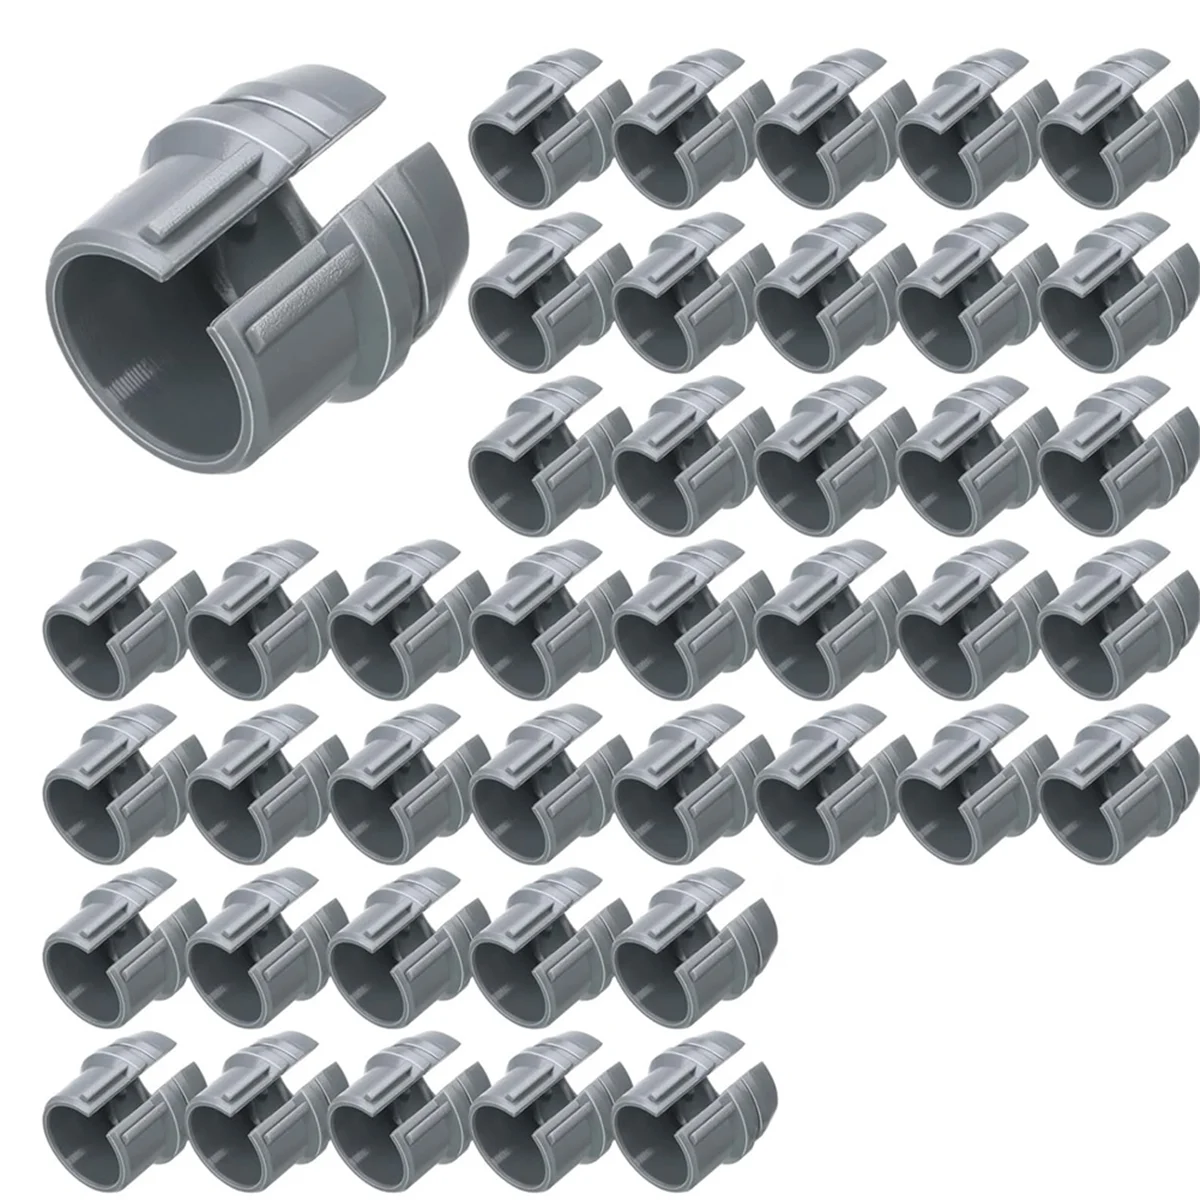 

100Pcs Non Metallic Cable Connectors Wire Fixing Buckle,Snap Style Installation for Wiring 14/2-10/3 AWG,(1/2 Inch)